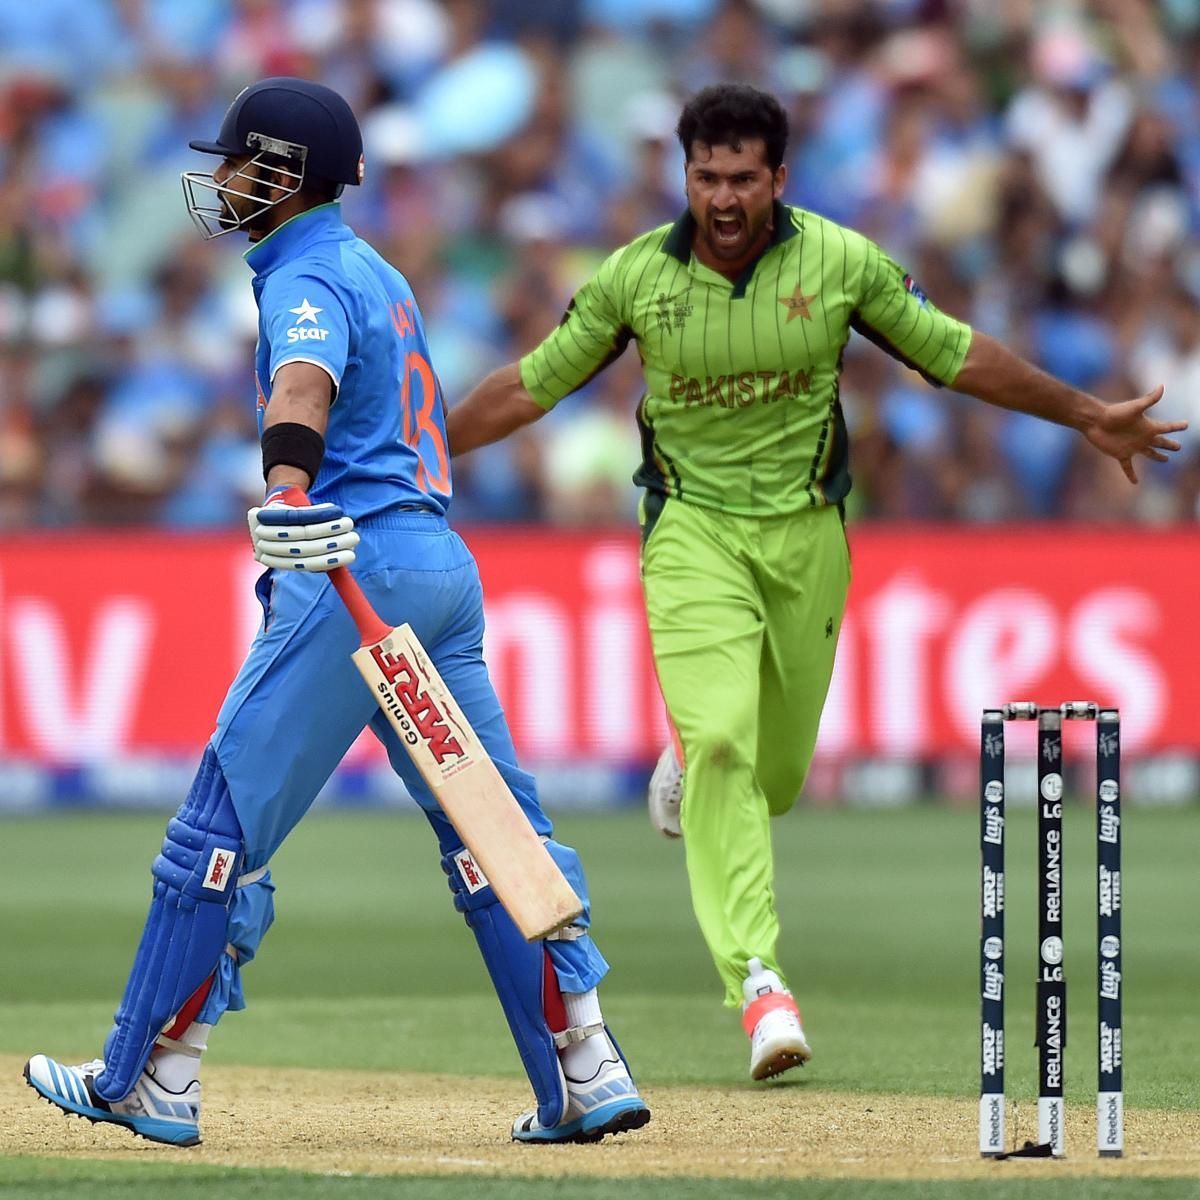 Sohail Khan registered a five-wicket haul against India in the 2015 World Cup